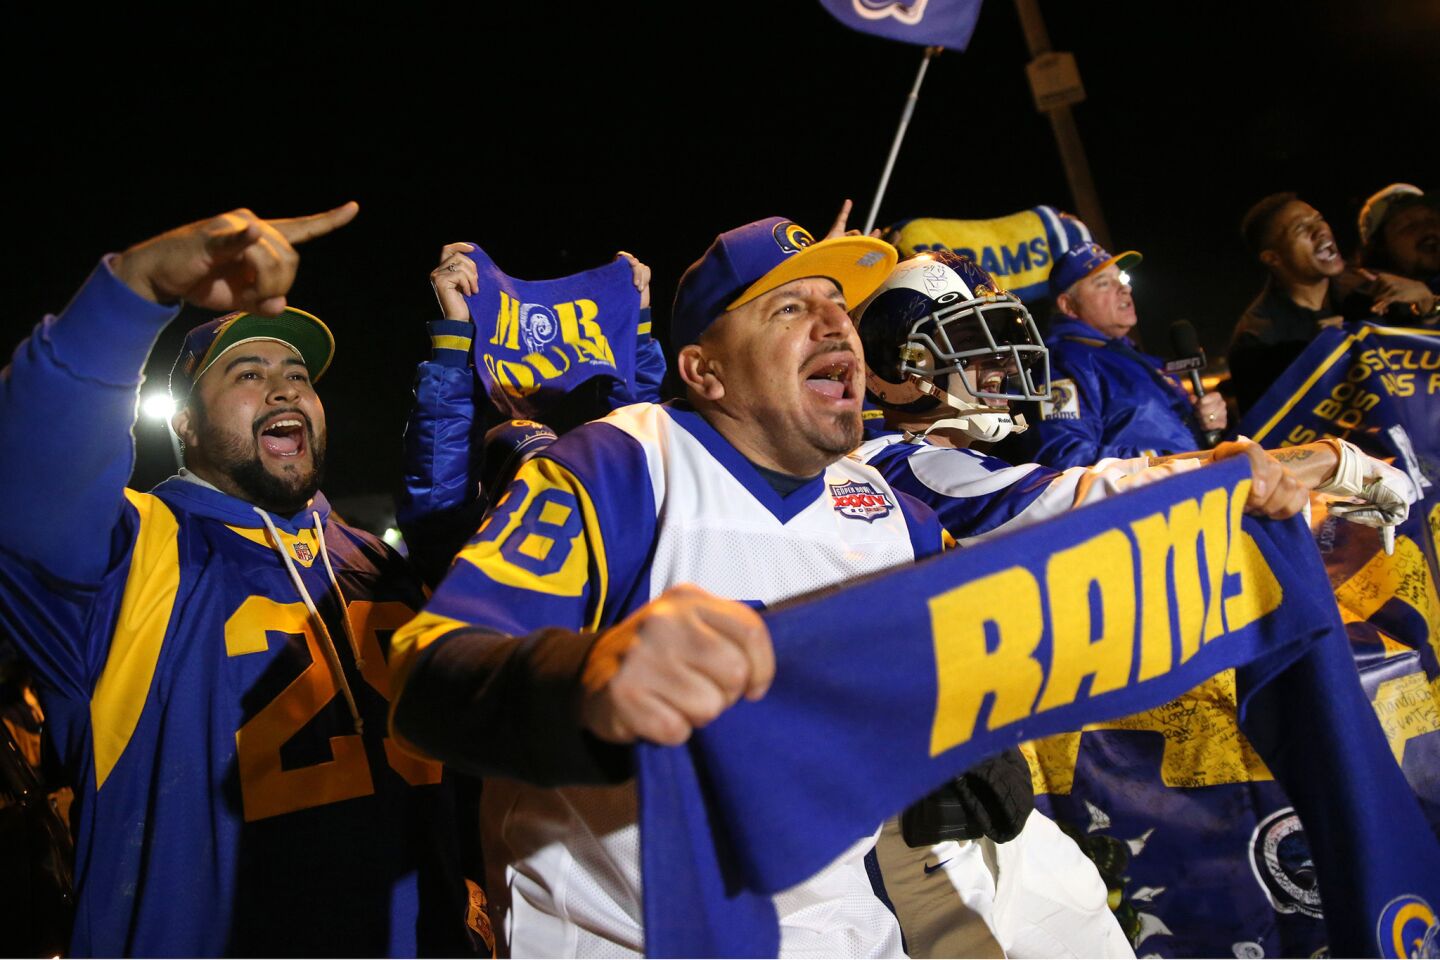 Alfredo Prieto, center, joins dozens of other Rams fans at Hollywood Park on Jan. 12 to celebrate the team's homecoming.